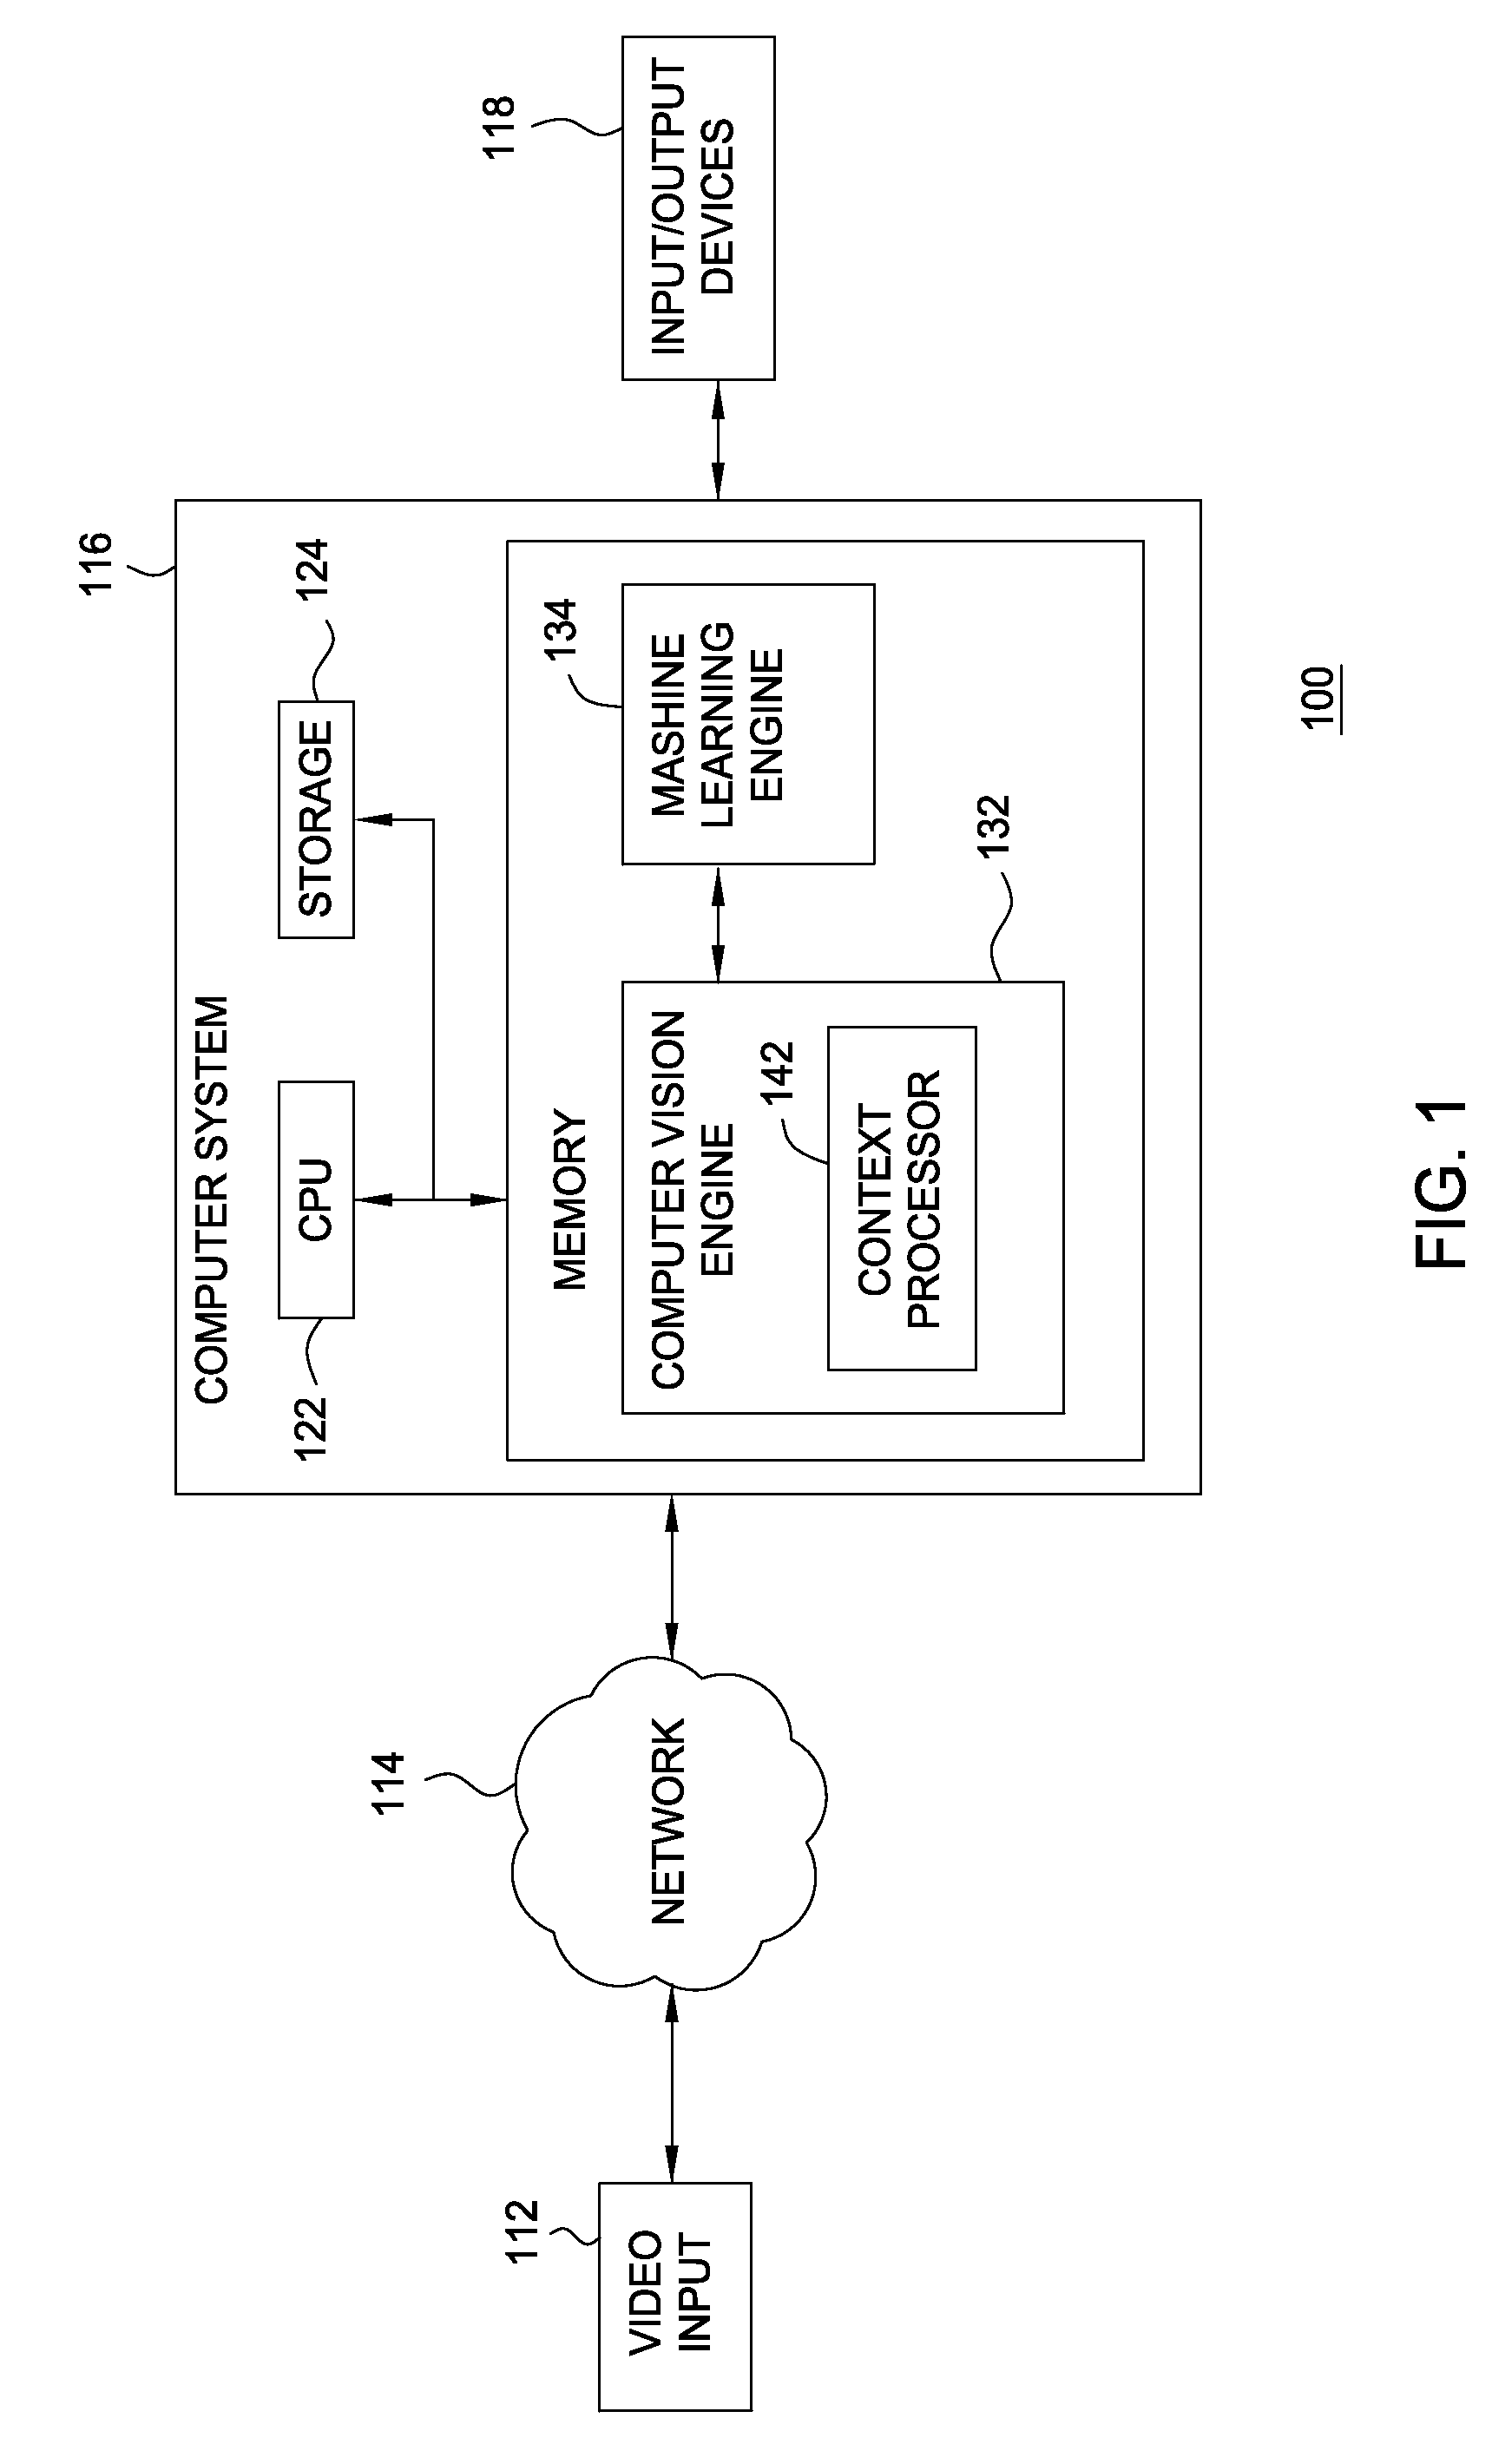 Context processor for video analysis system